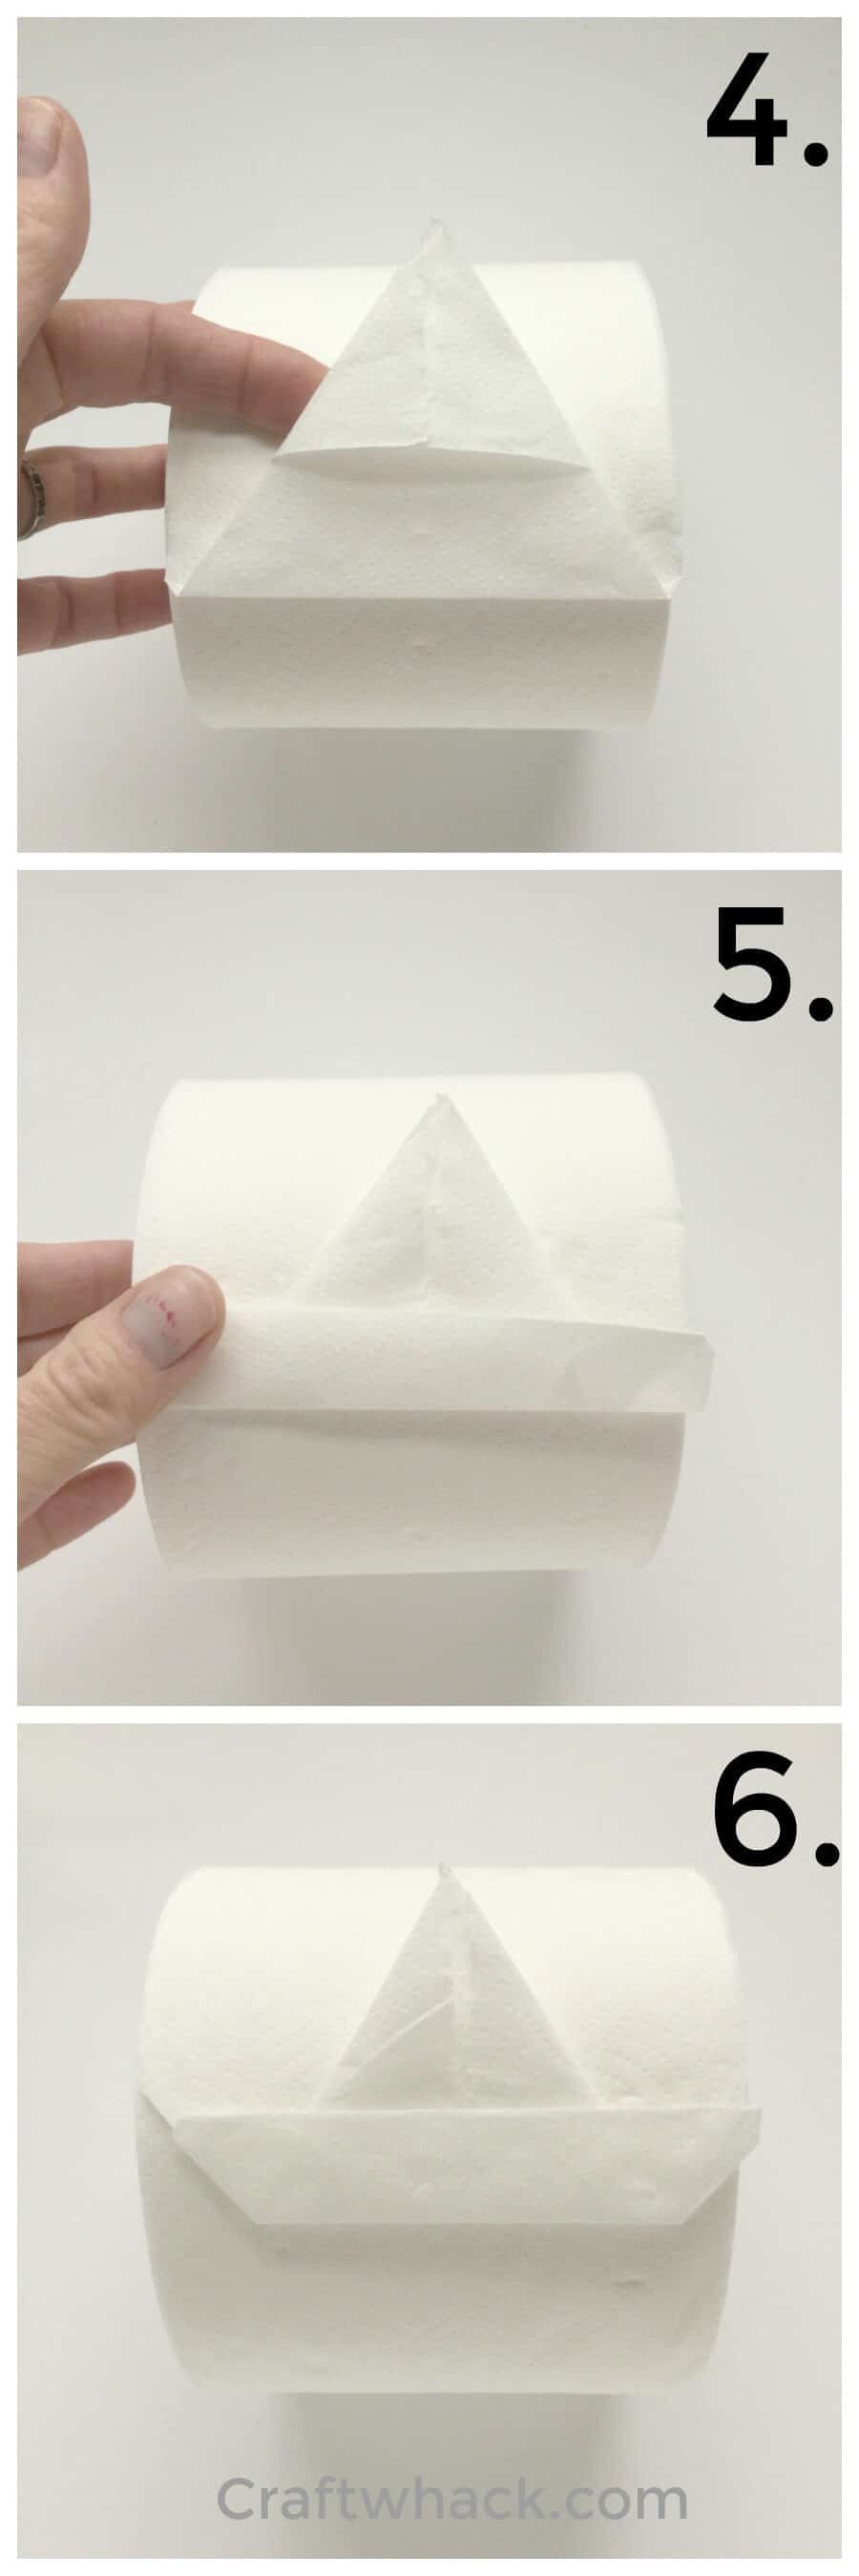 how to make a sailboat out of toilet paper